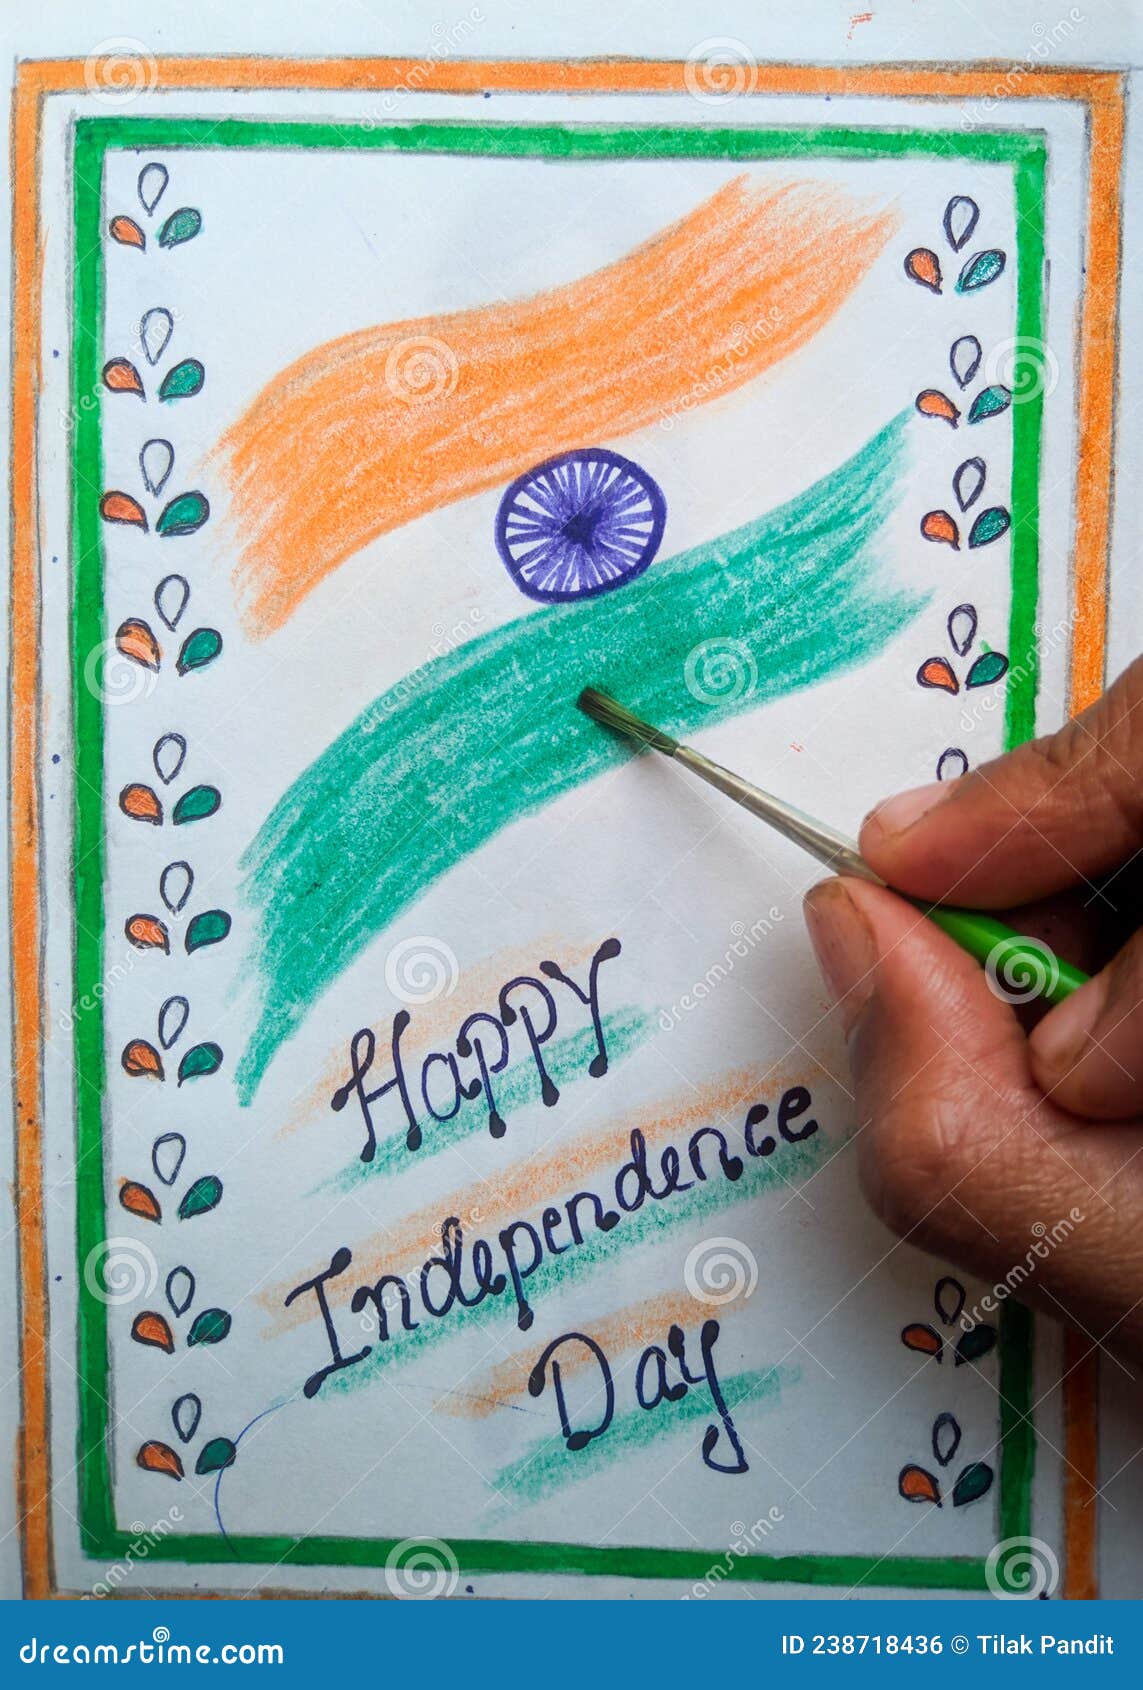 Republic Drawing India S Independence Day Png Freeuse - India Independence  Day Drawing India, Transparent Png , Transparent Png Image - PNGitem